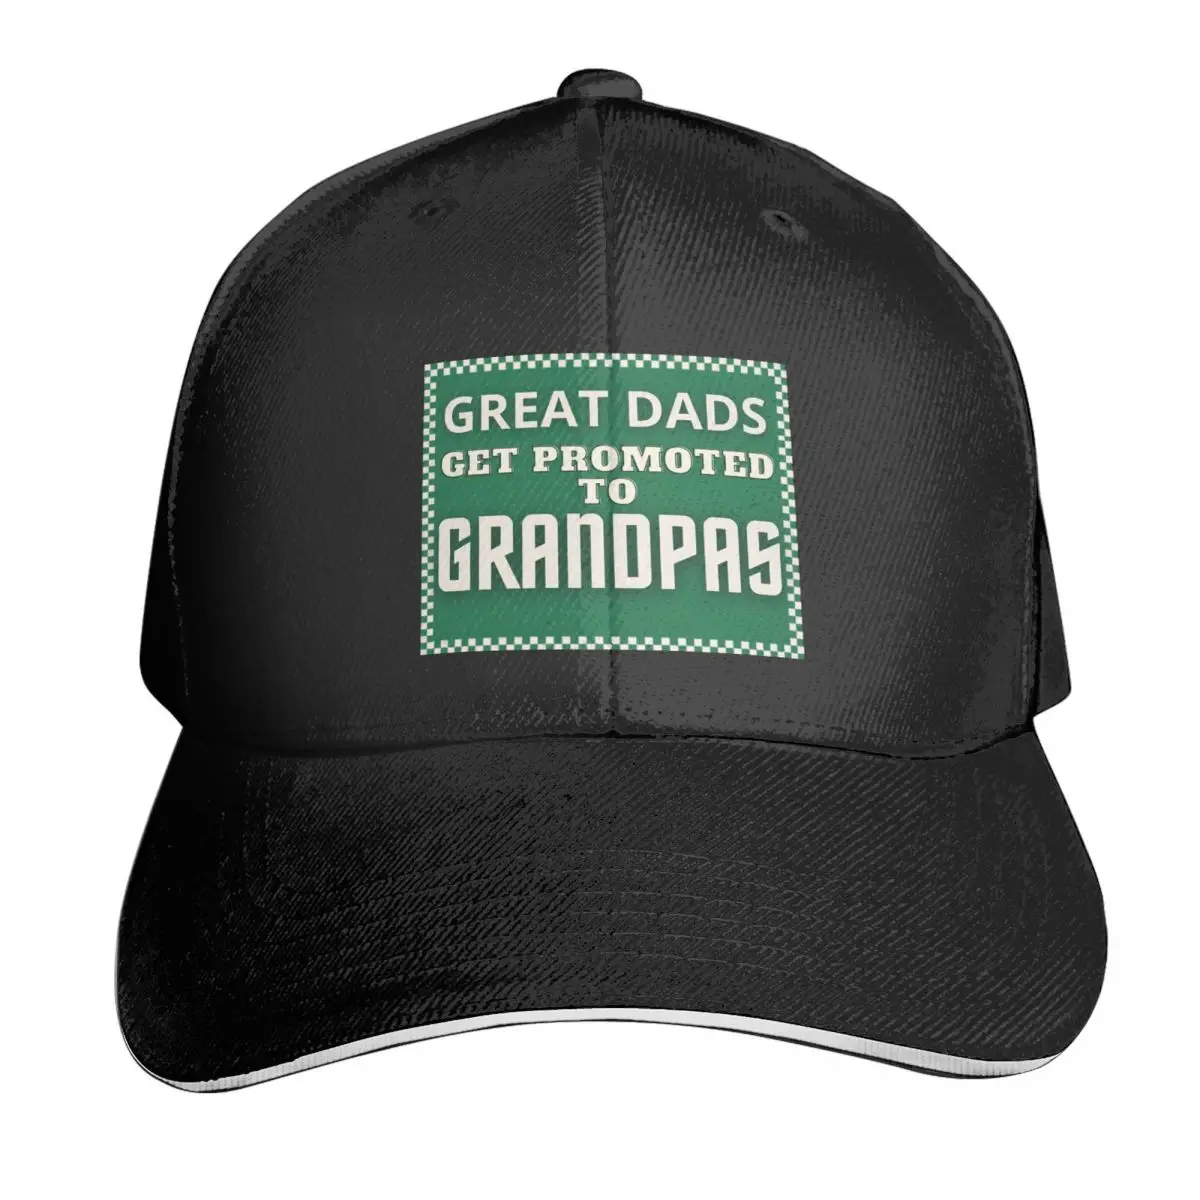 

Great Dads Get Promoted To Grandpas I Great Casquette, Polyester Cap Holiday Moisture Wicking Curved Brim